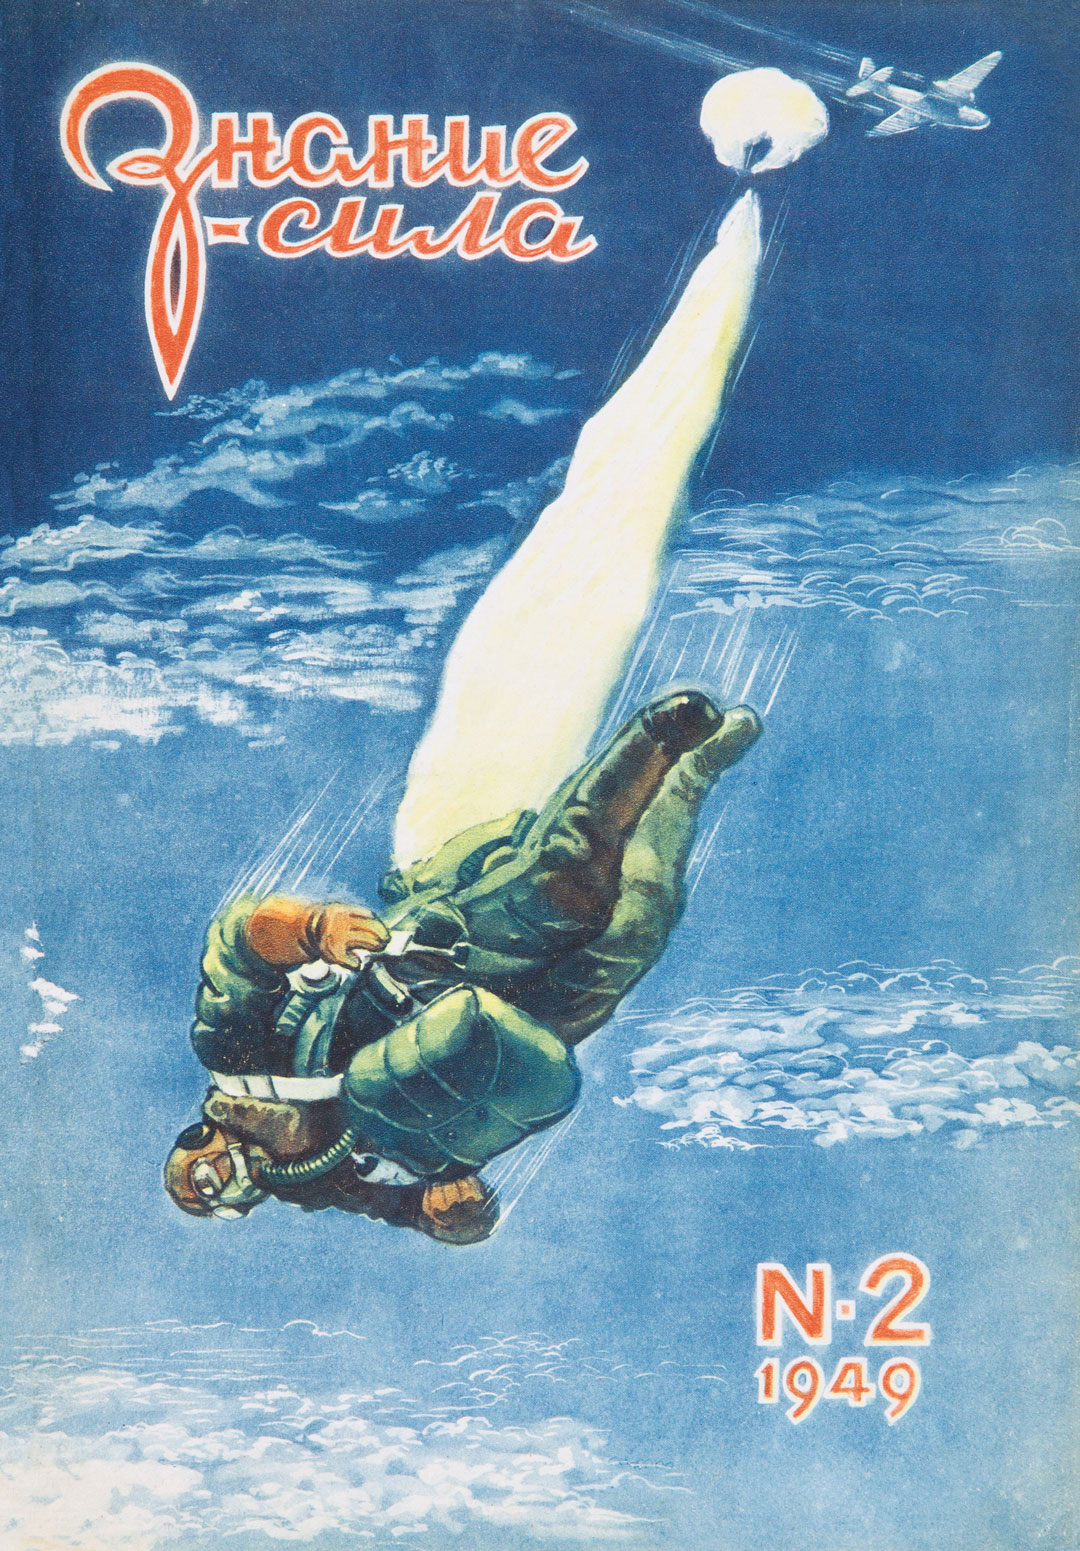 Knowledge is Power, issue 2, 1949, illustration by K. Artseulov for an interview with Vasily Romanyuk, the first person to complete a parachute jump from the Earth’s stratosphere, at a height of 13,000 metres (42,650 feet). Picture credit: The Moscow Design Museum (page 91)